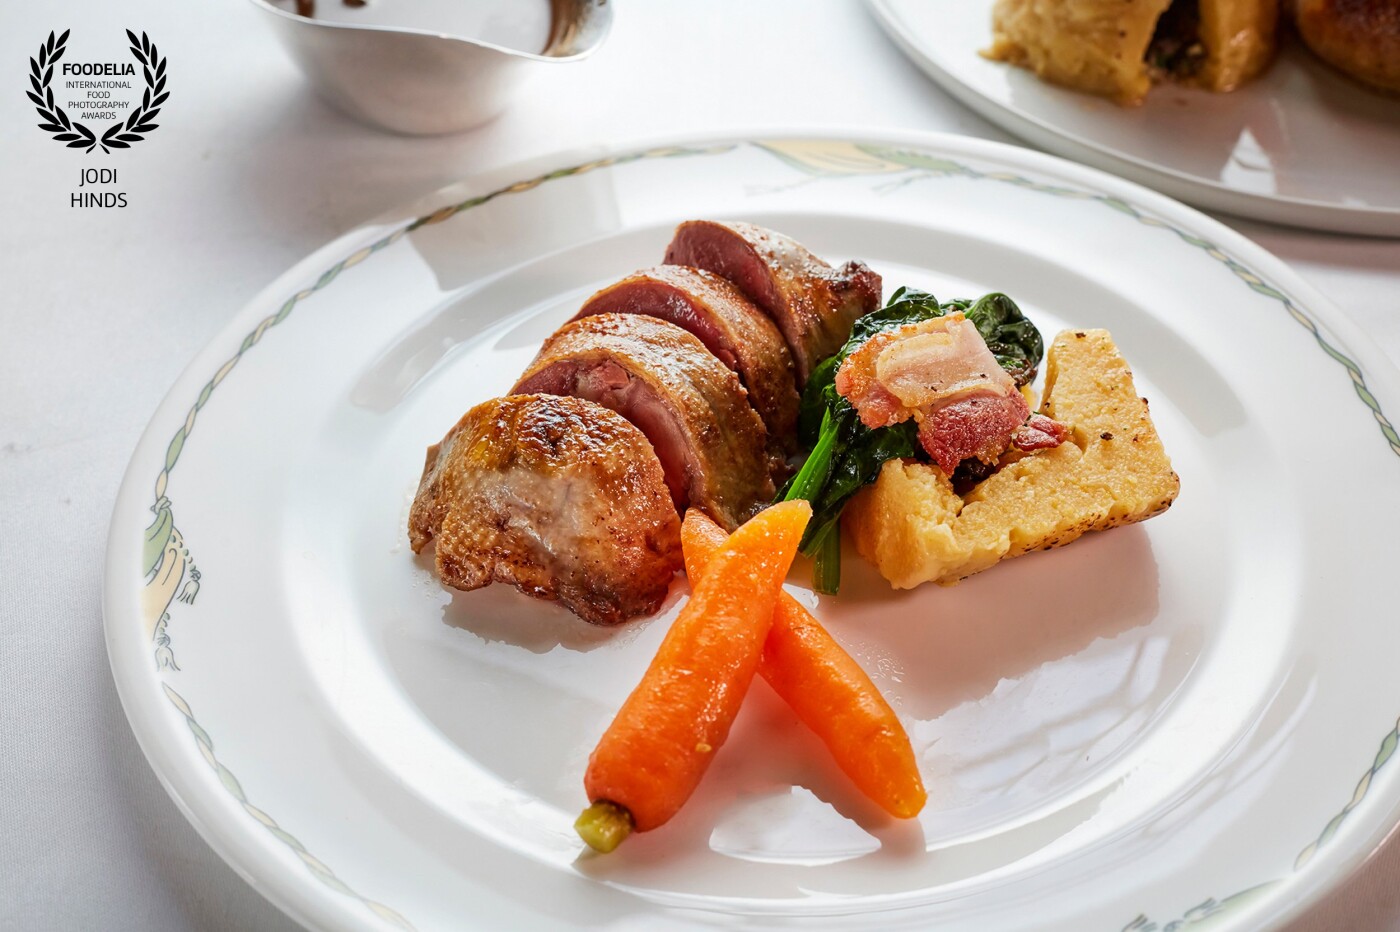 Winner of the Roux Scholarship 2018 is Martin Carabott and here is his winning dish Pigeonneaux Valenciennes-style, vin jaune sauce: whole roasted pigeons stuffed with forcemeat and sweetbreads, garnished with spinach and carrots. Served with glazed polenta and morels timbales, accompanied with a vin jaune sauce.<br />
<br />
Chef: @martin0carabott<br />
Restaurant: @hide_restaurant<br />
Competition: @roux_scholarship<br />
Photograph: @jodihindsphoto